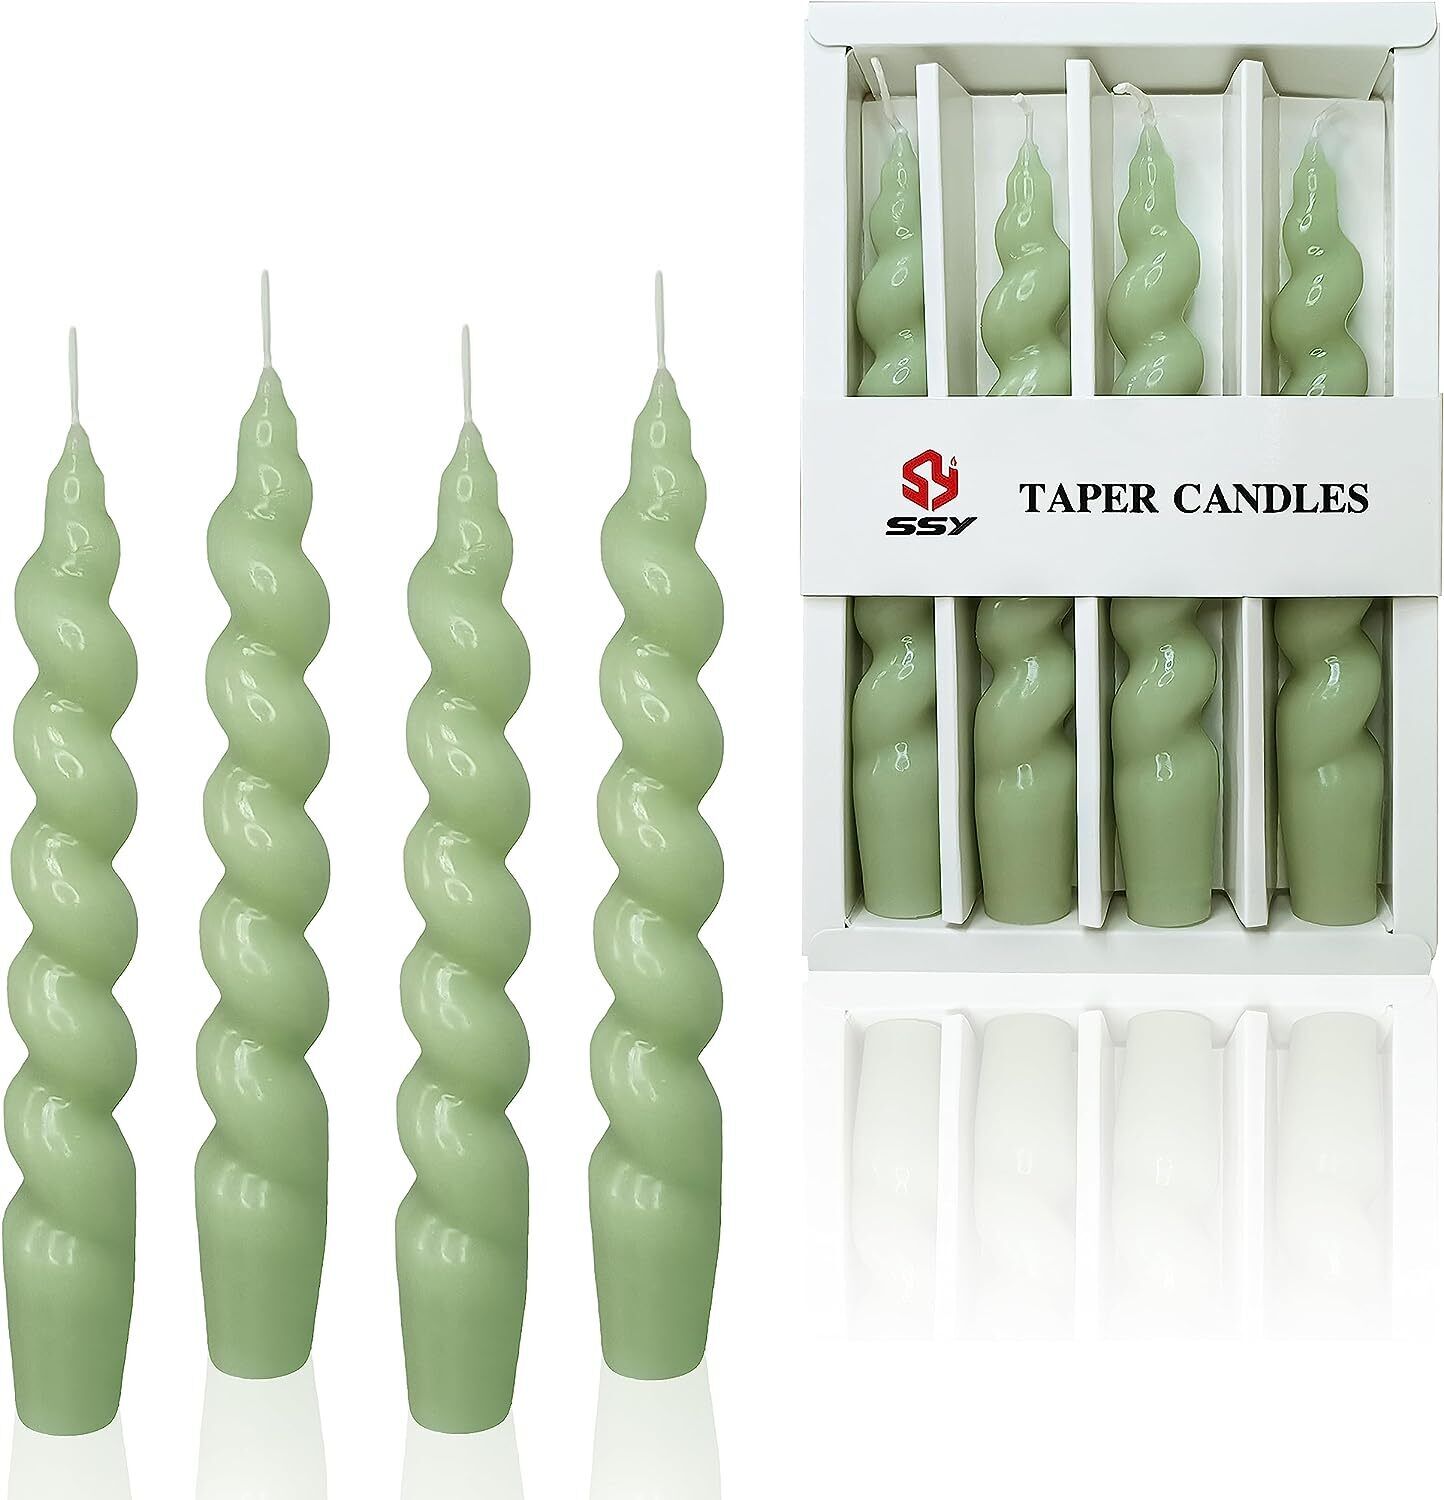 5-8 Hour Unscented Candle 4 Green Candles Per Box Spiral Taper Candle 5 Days ETD